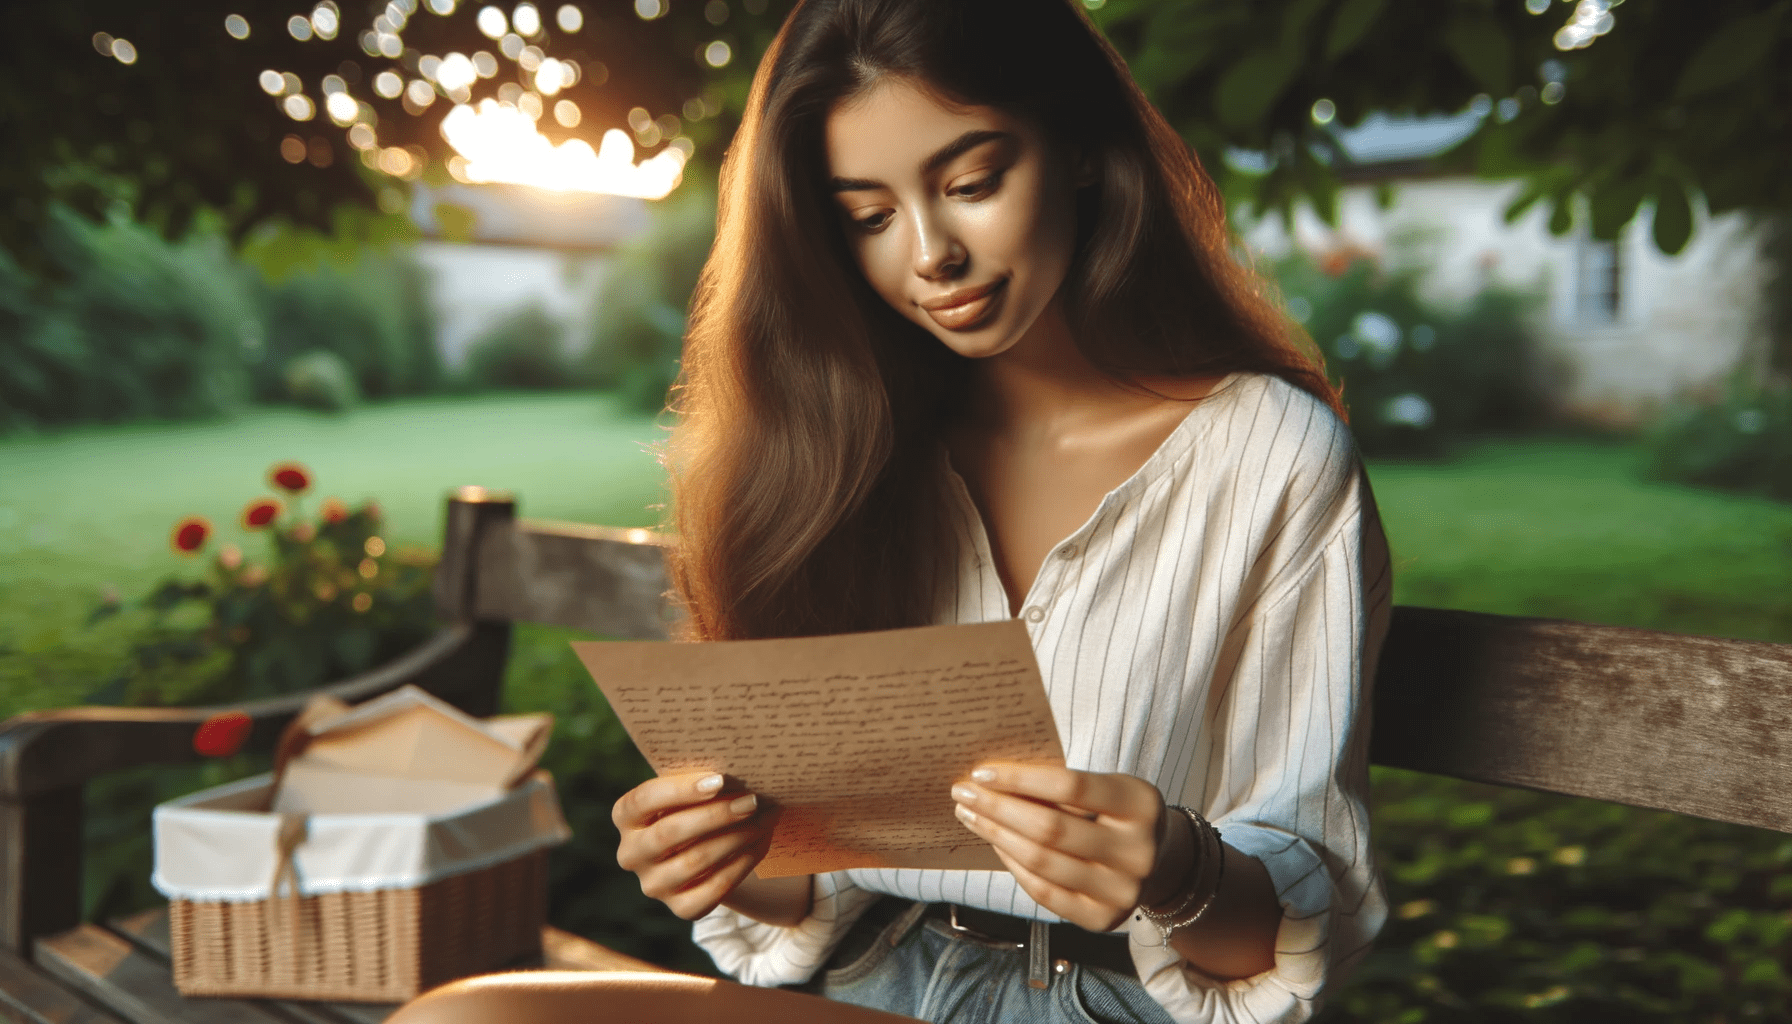 Photo in a serene garden setting. A girl of diverse descent sits on a bench unfolding a handwritten letter. As she reads her eyes well up with tears